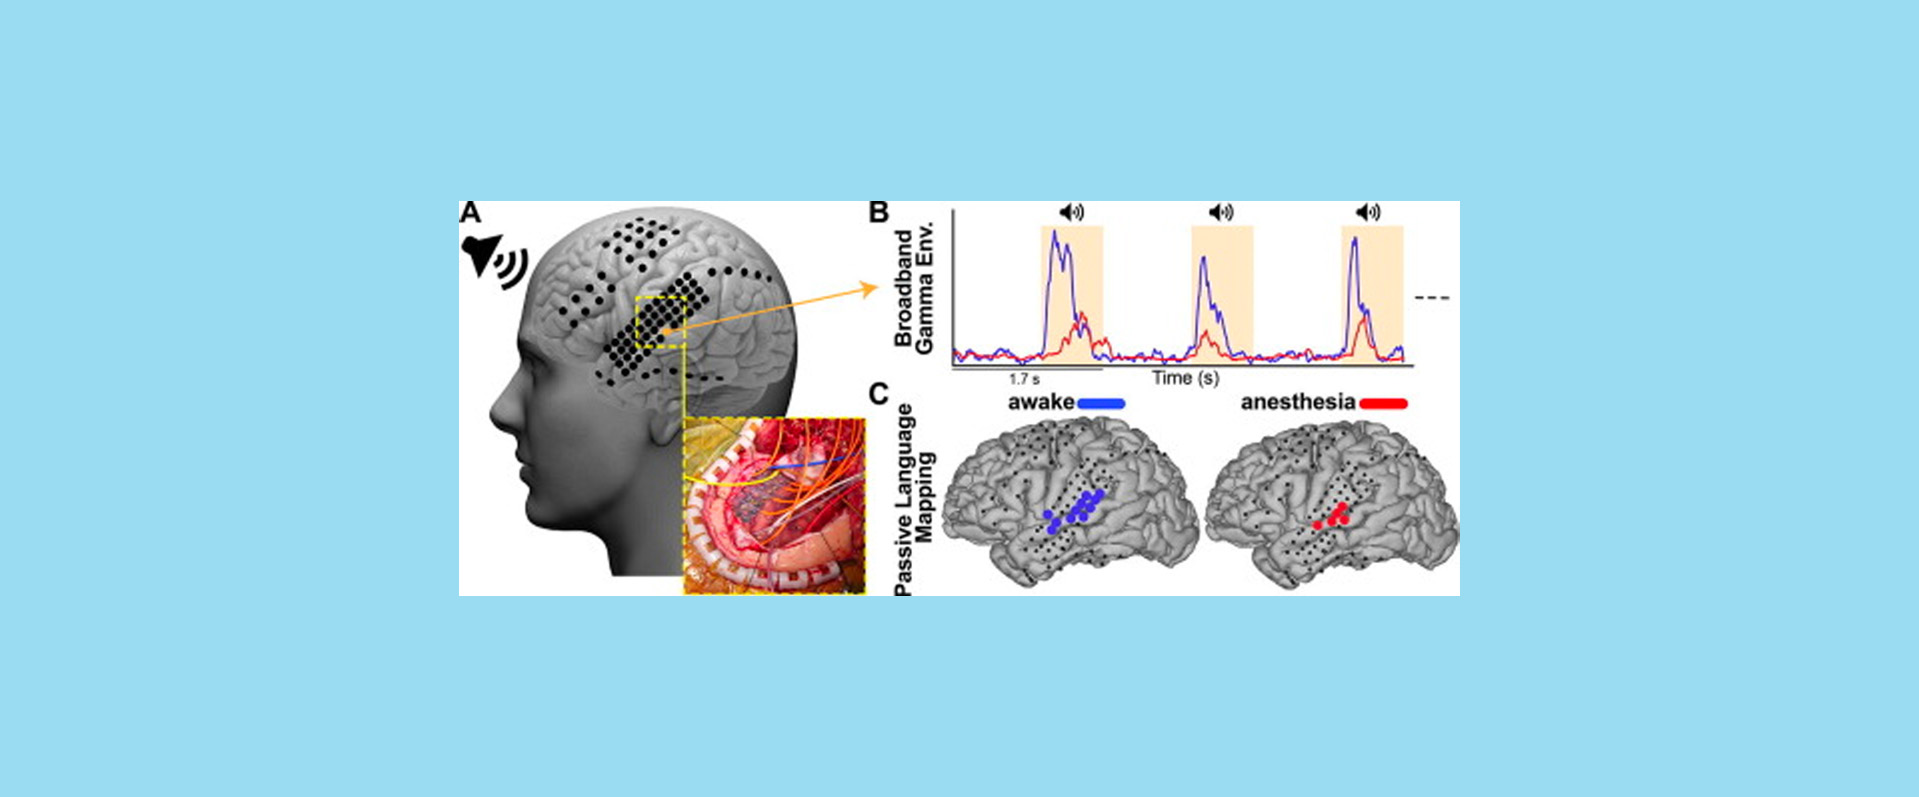 Proving the Feasibility of Passive Functional Mapping in the Receptive Language Cortex during General Anesthesia